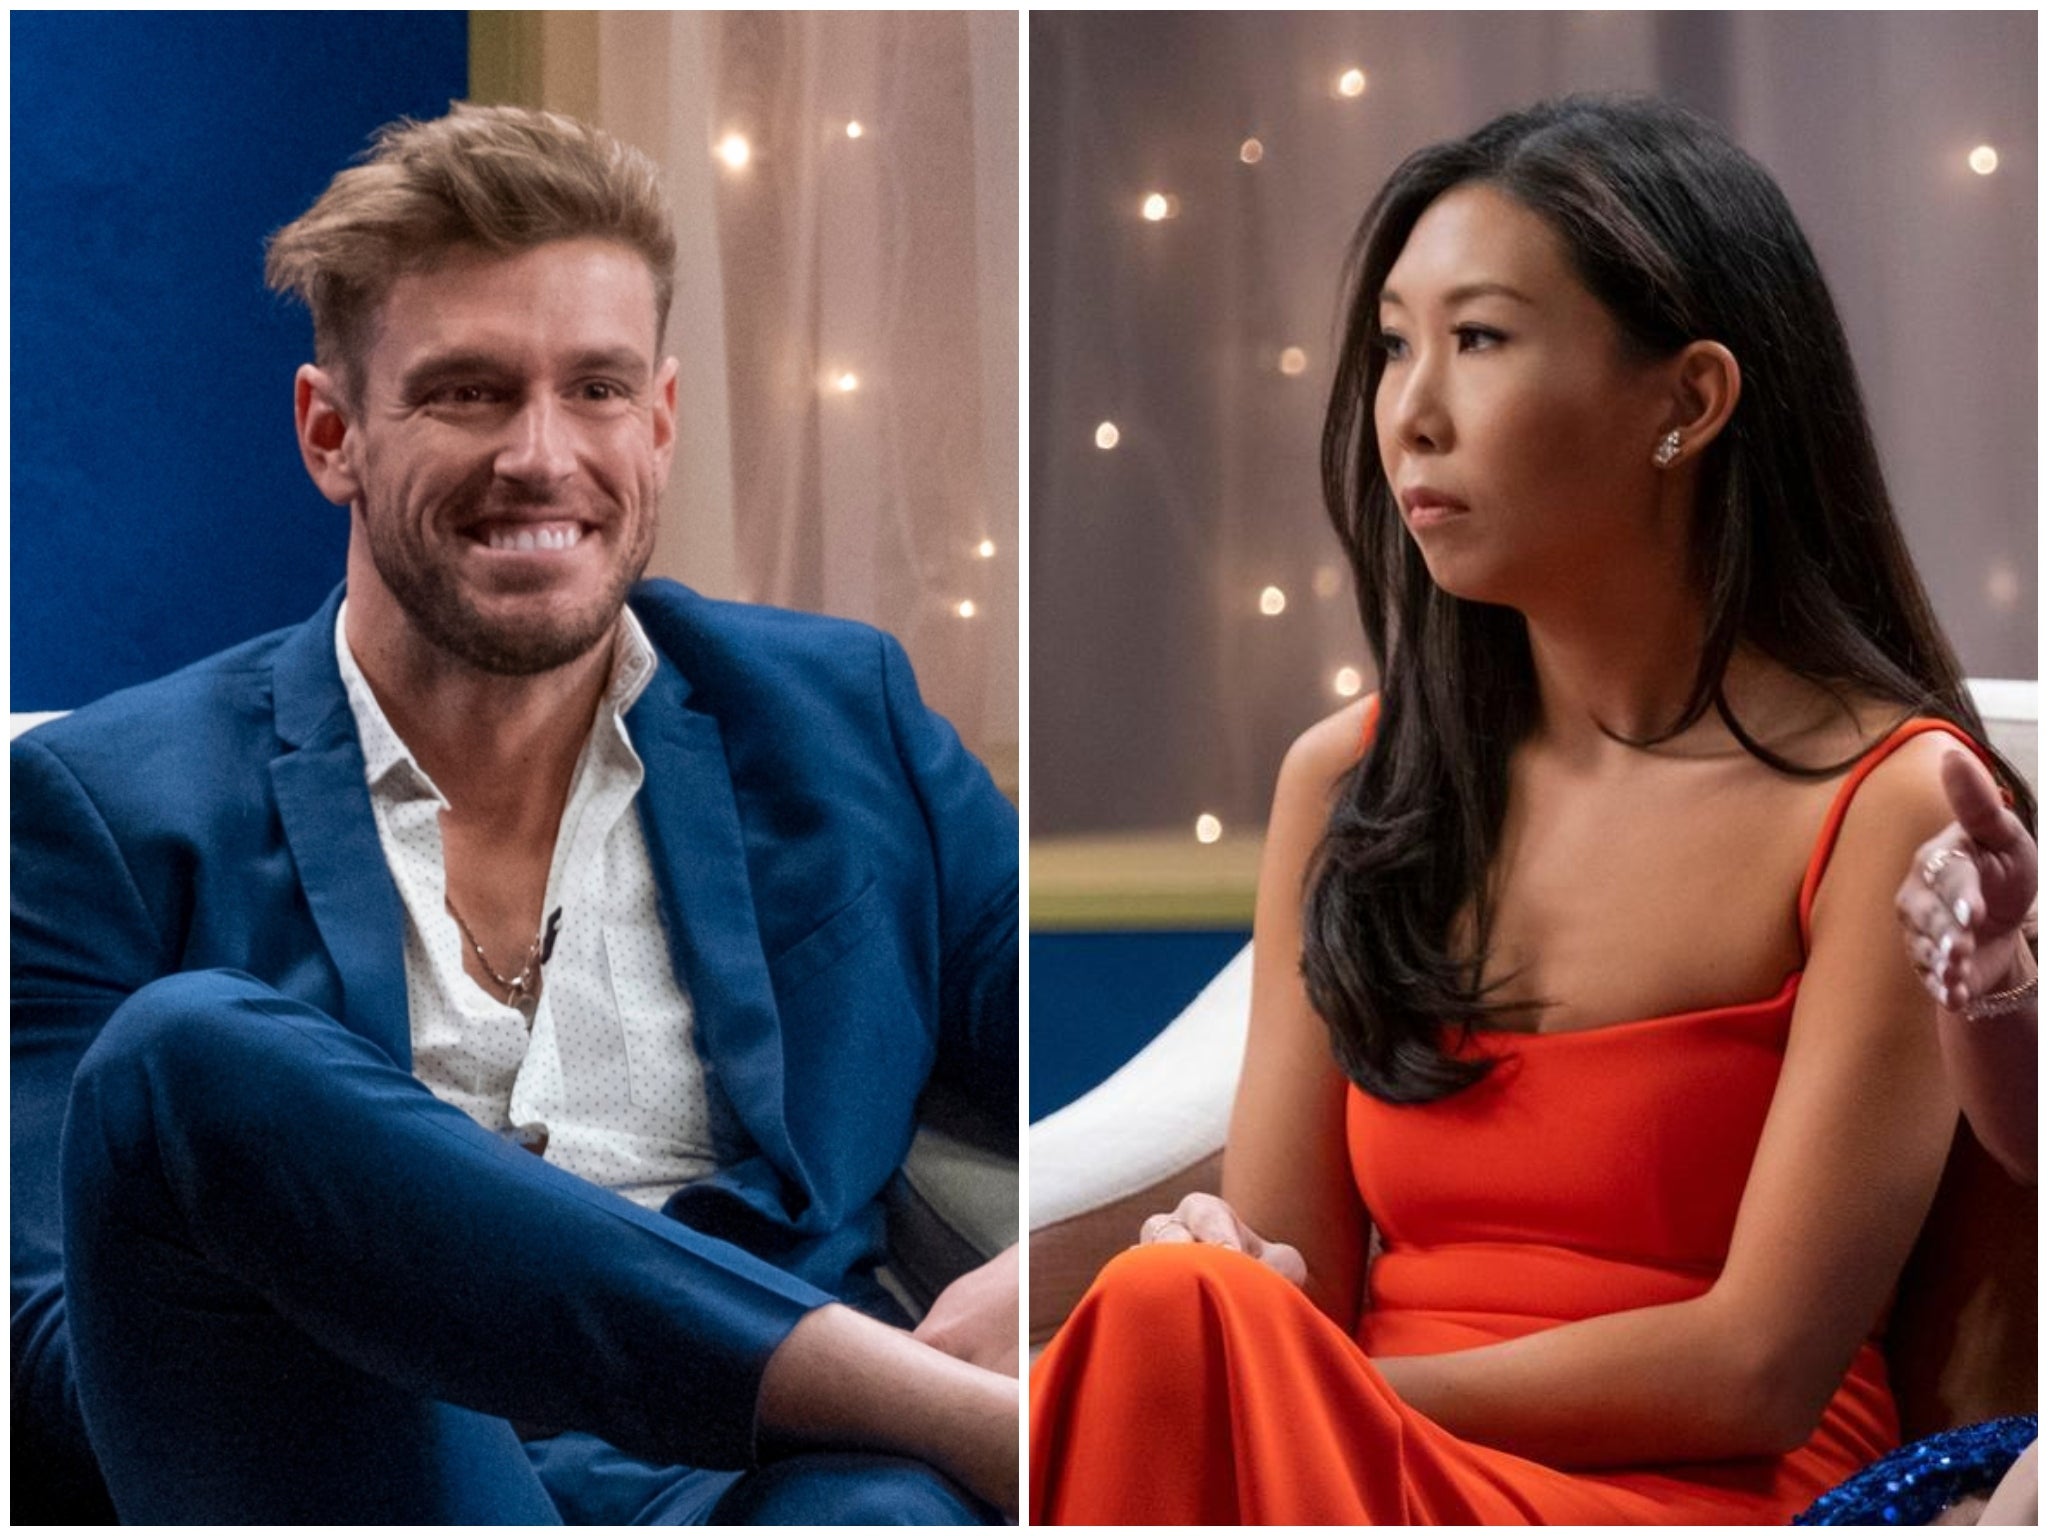 LIB's Natalie Calls Out Ex Shayne for Joining New Dating Show